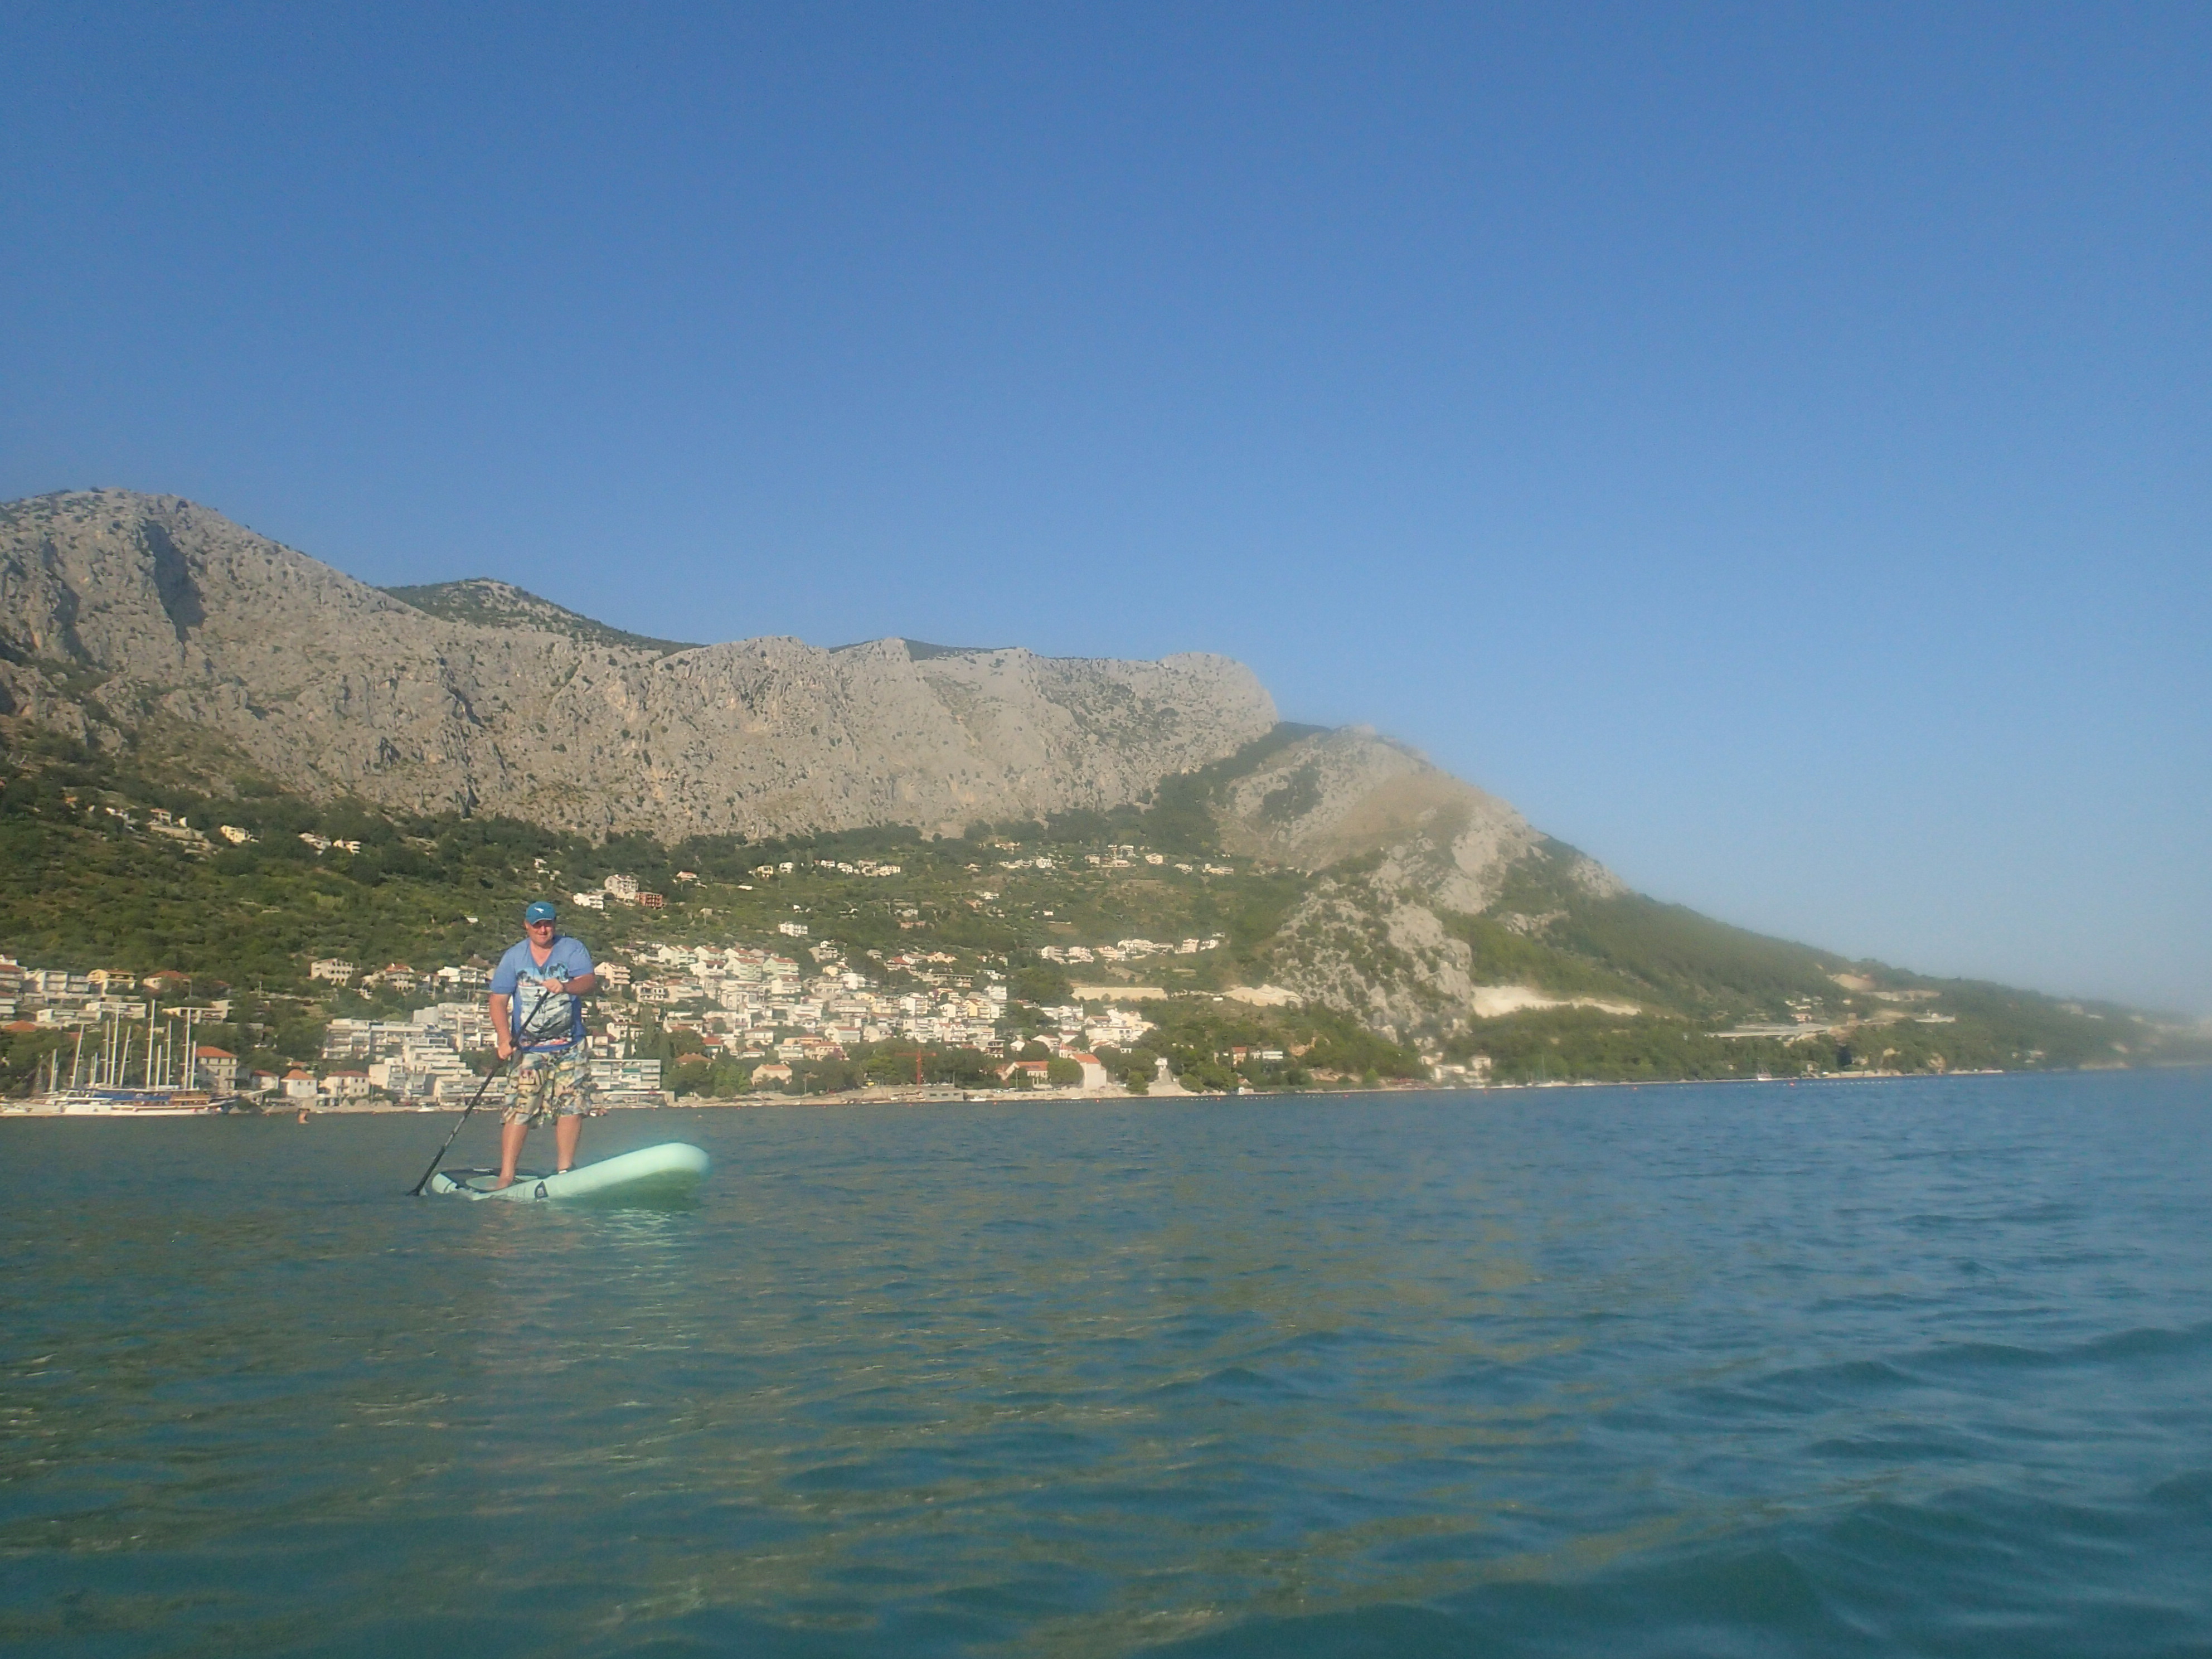 STAND UP PADDLE BOARDING TOUR ON THE RIVER CETINA